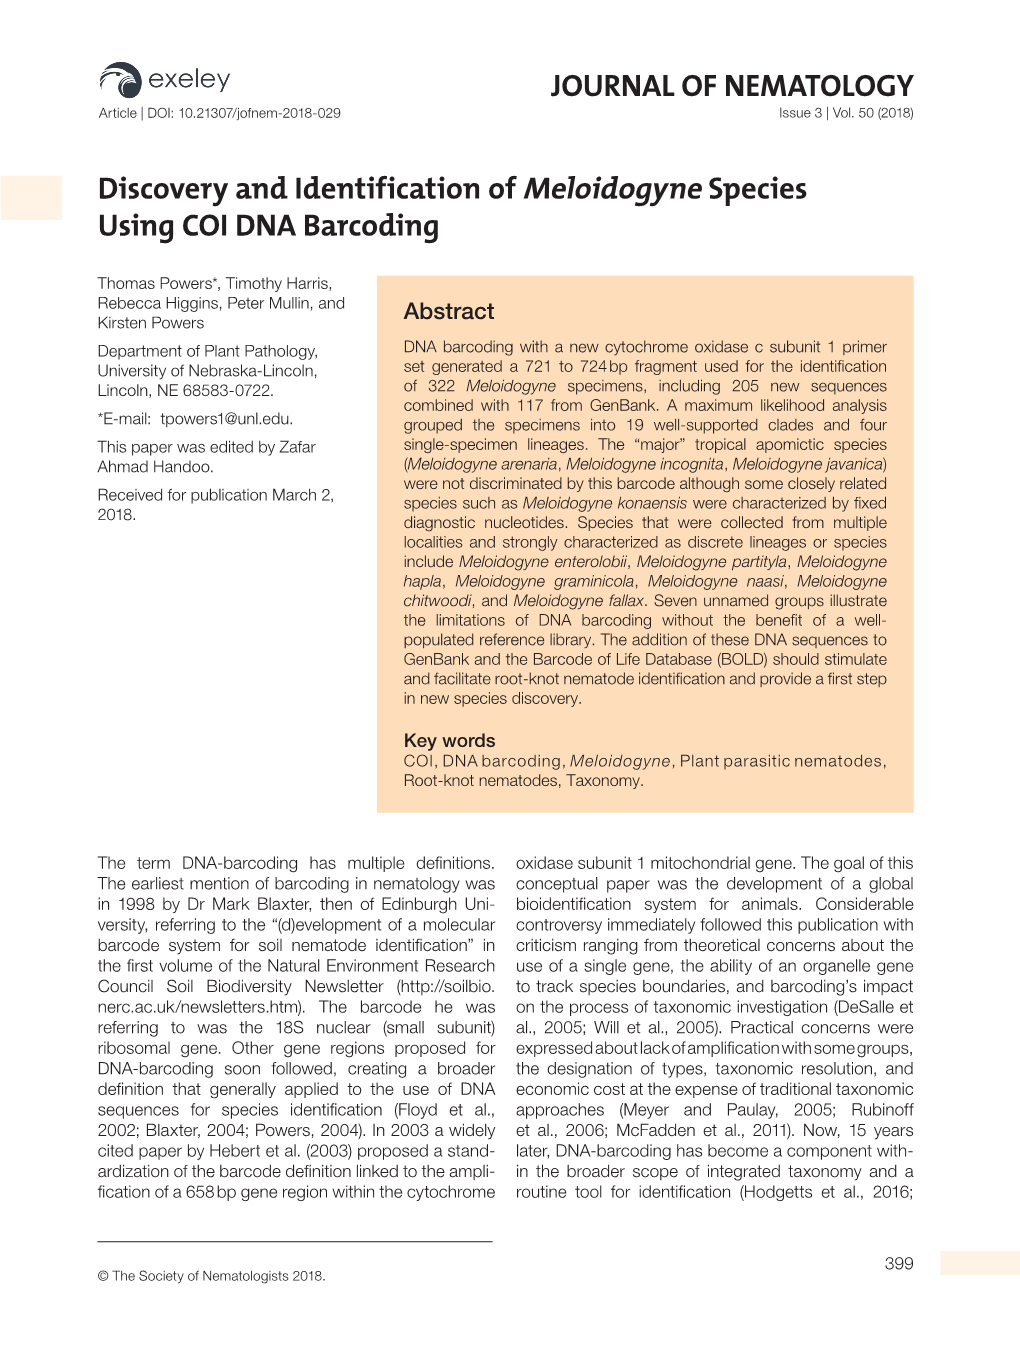 JOURNAL of NEMATOLOGY Discovery and Identification of Meloidogyne Species Using COI DNA Barcoding